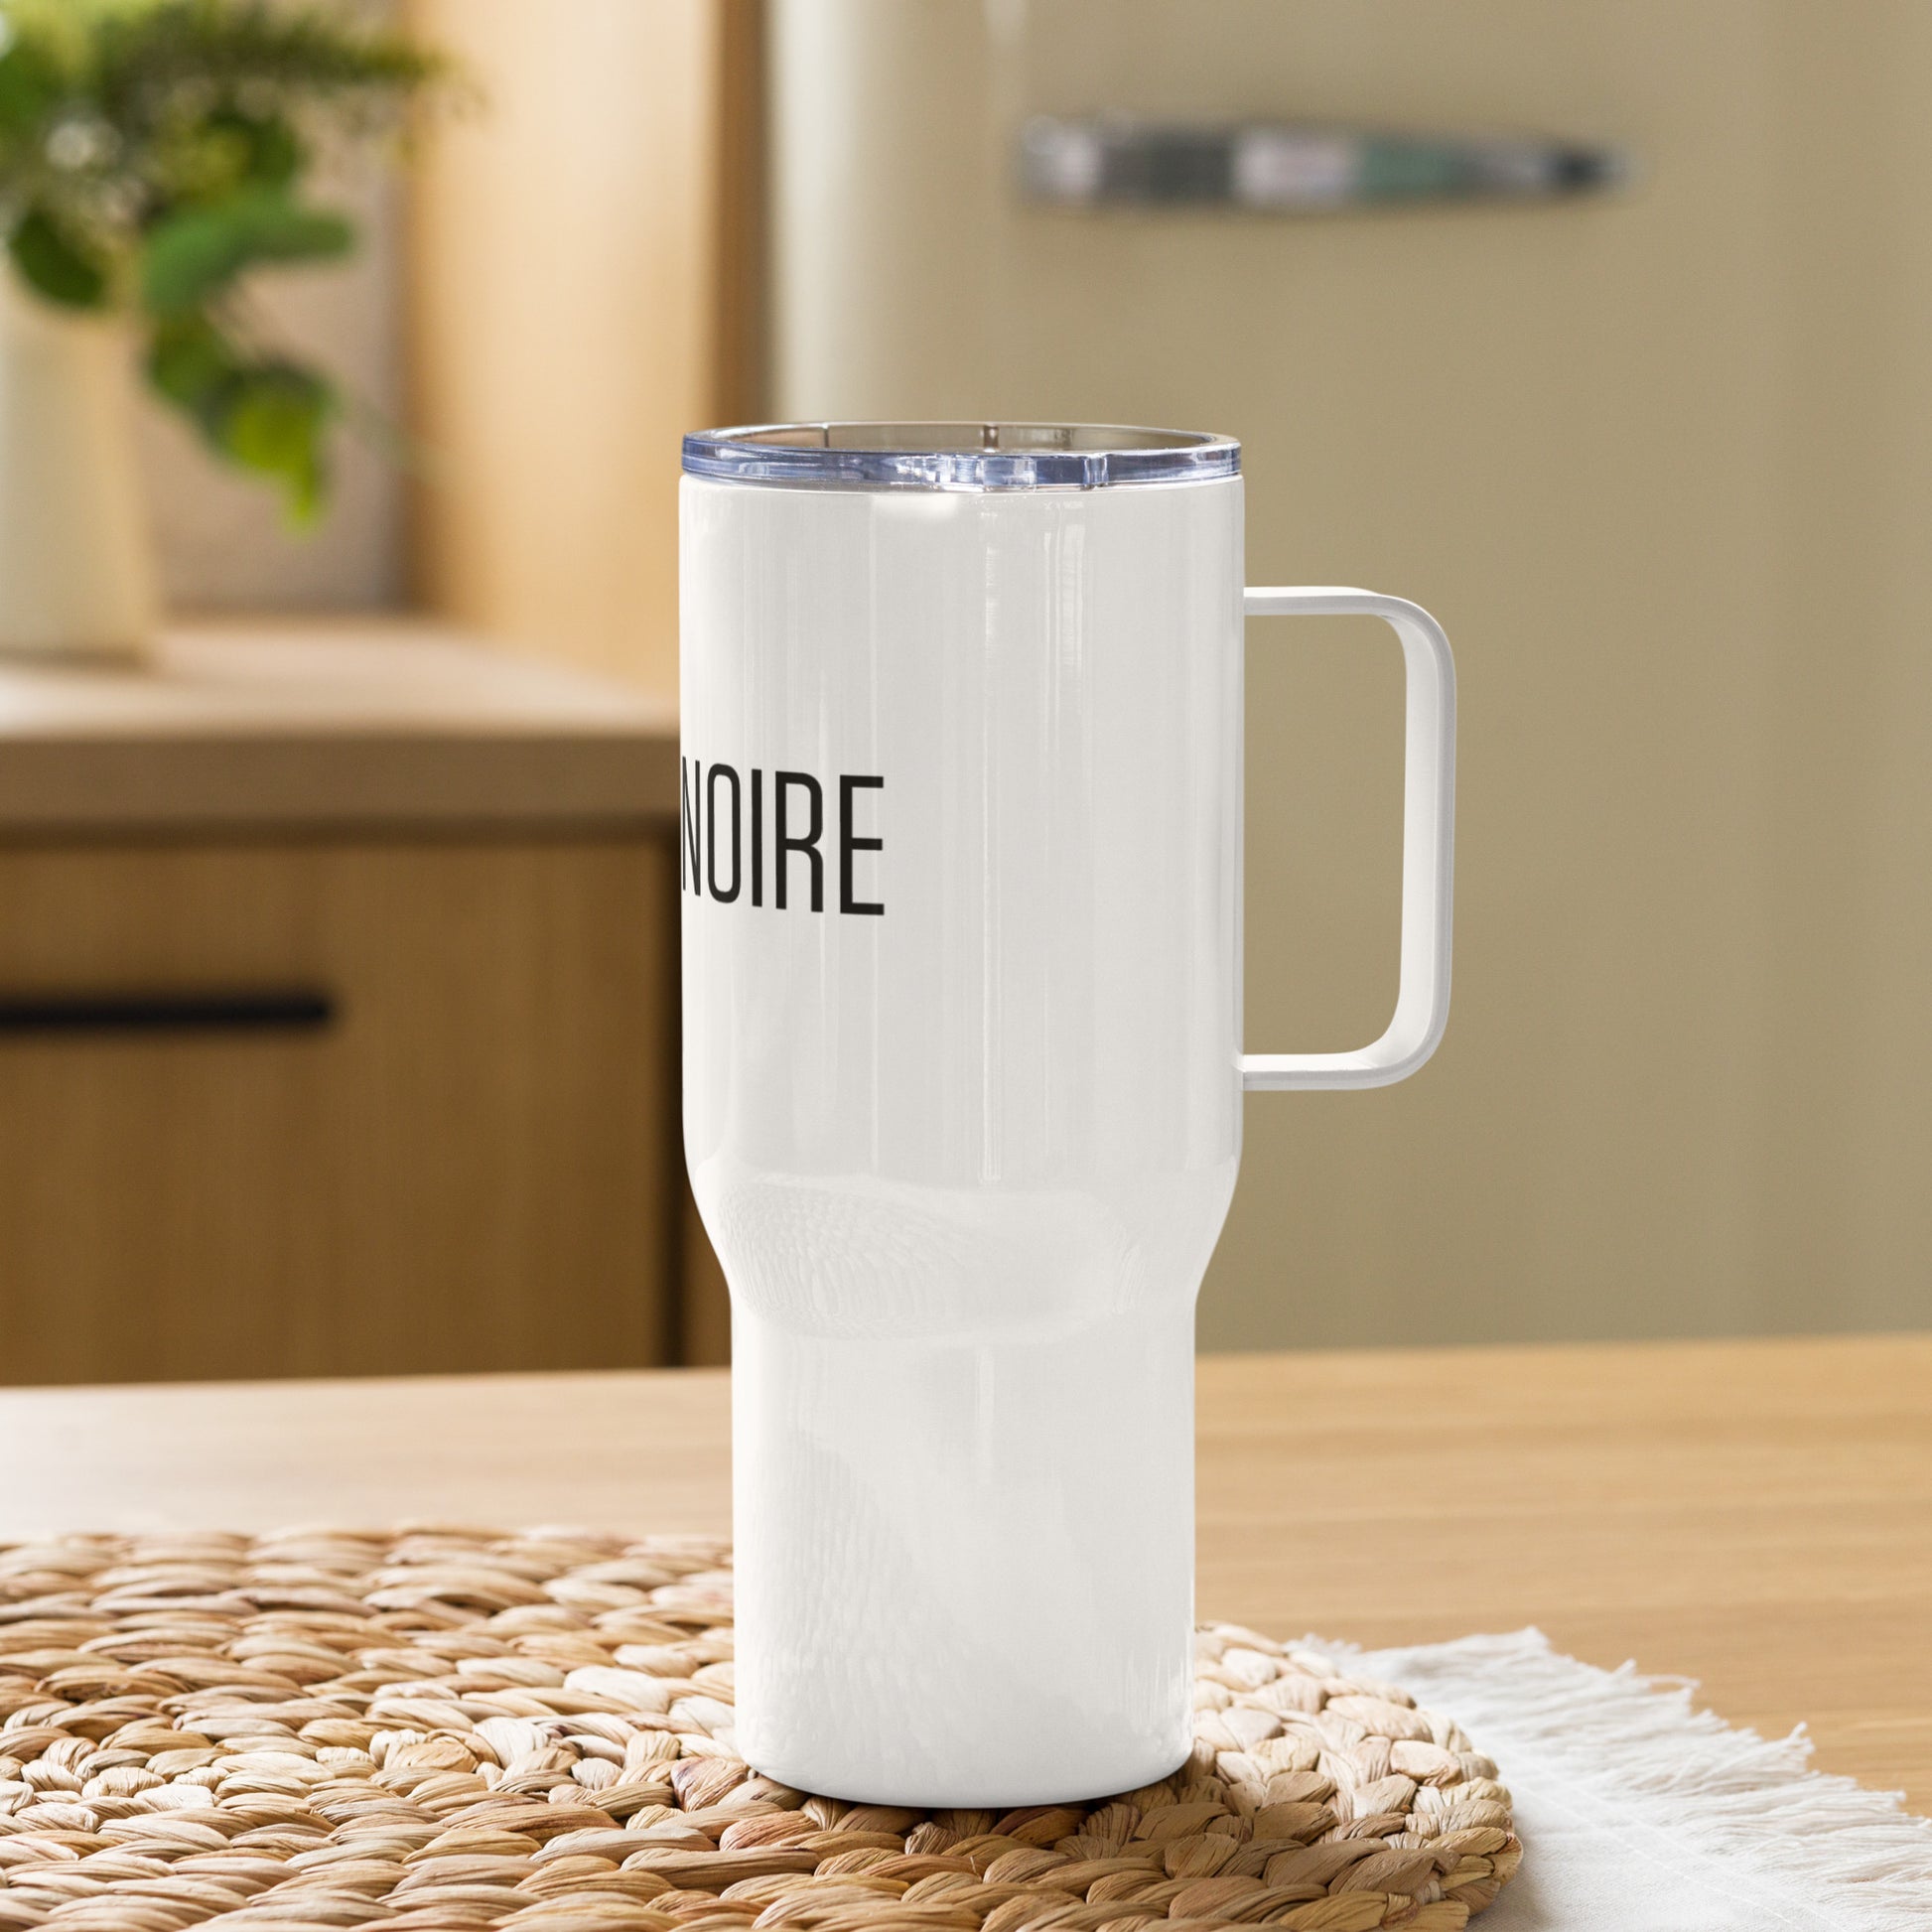 25oz Stainless Steel Tumbler, Insulated Coffee Tumbler Cup with